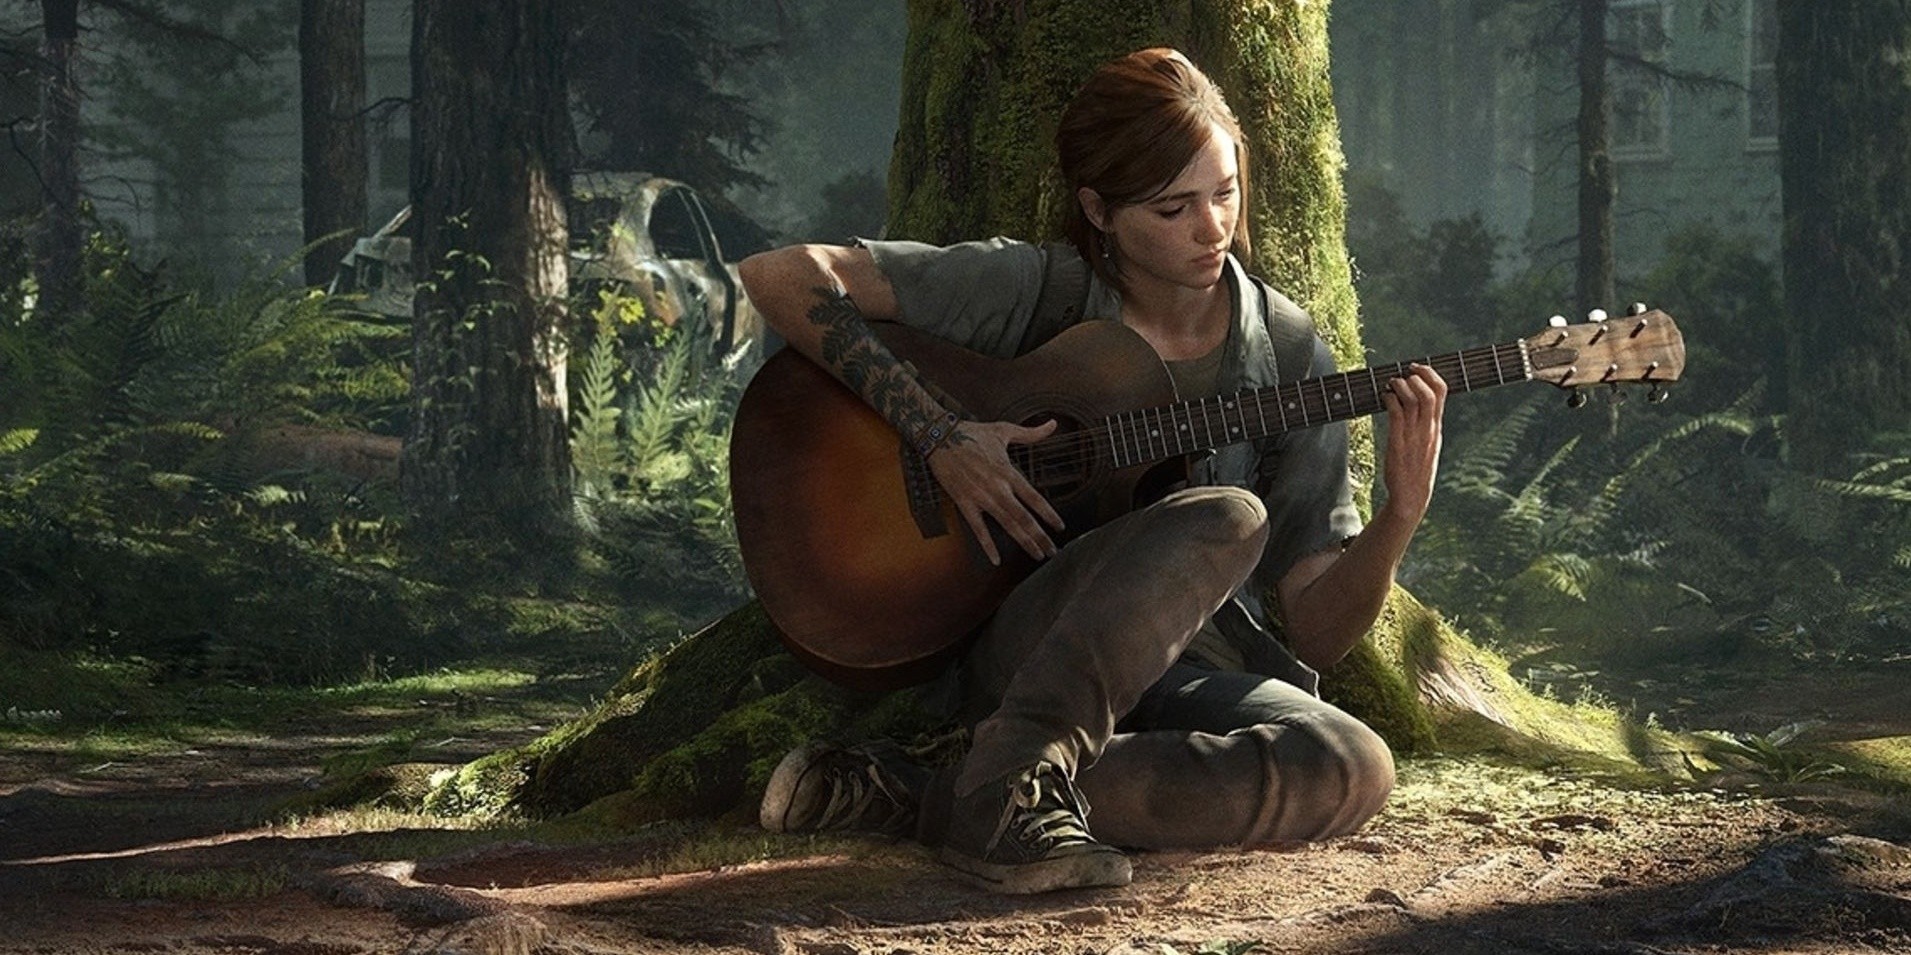 You can kick zombie butt and play 'Harana' on The Last of Us Part 2 – watch